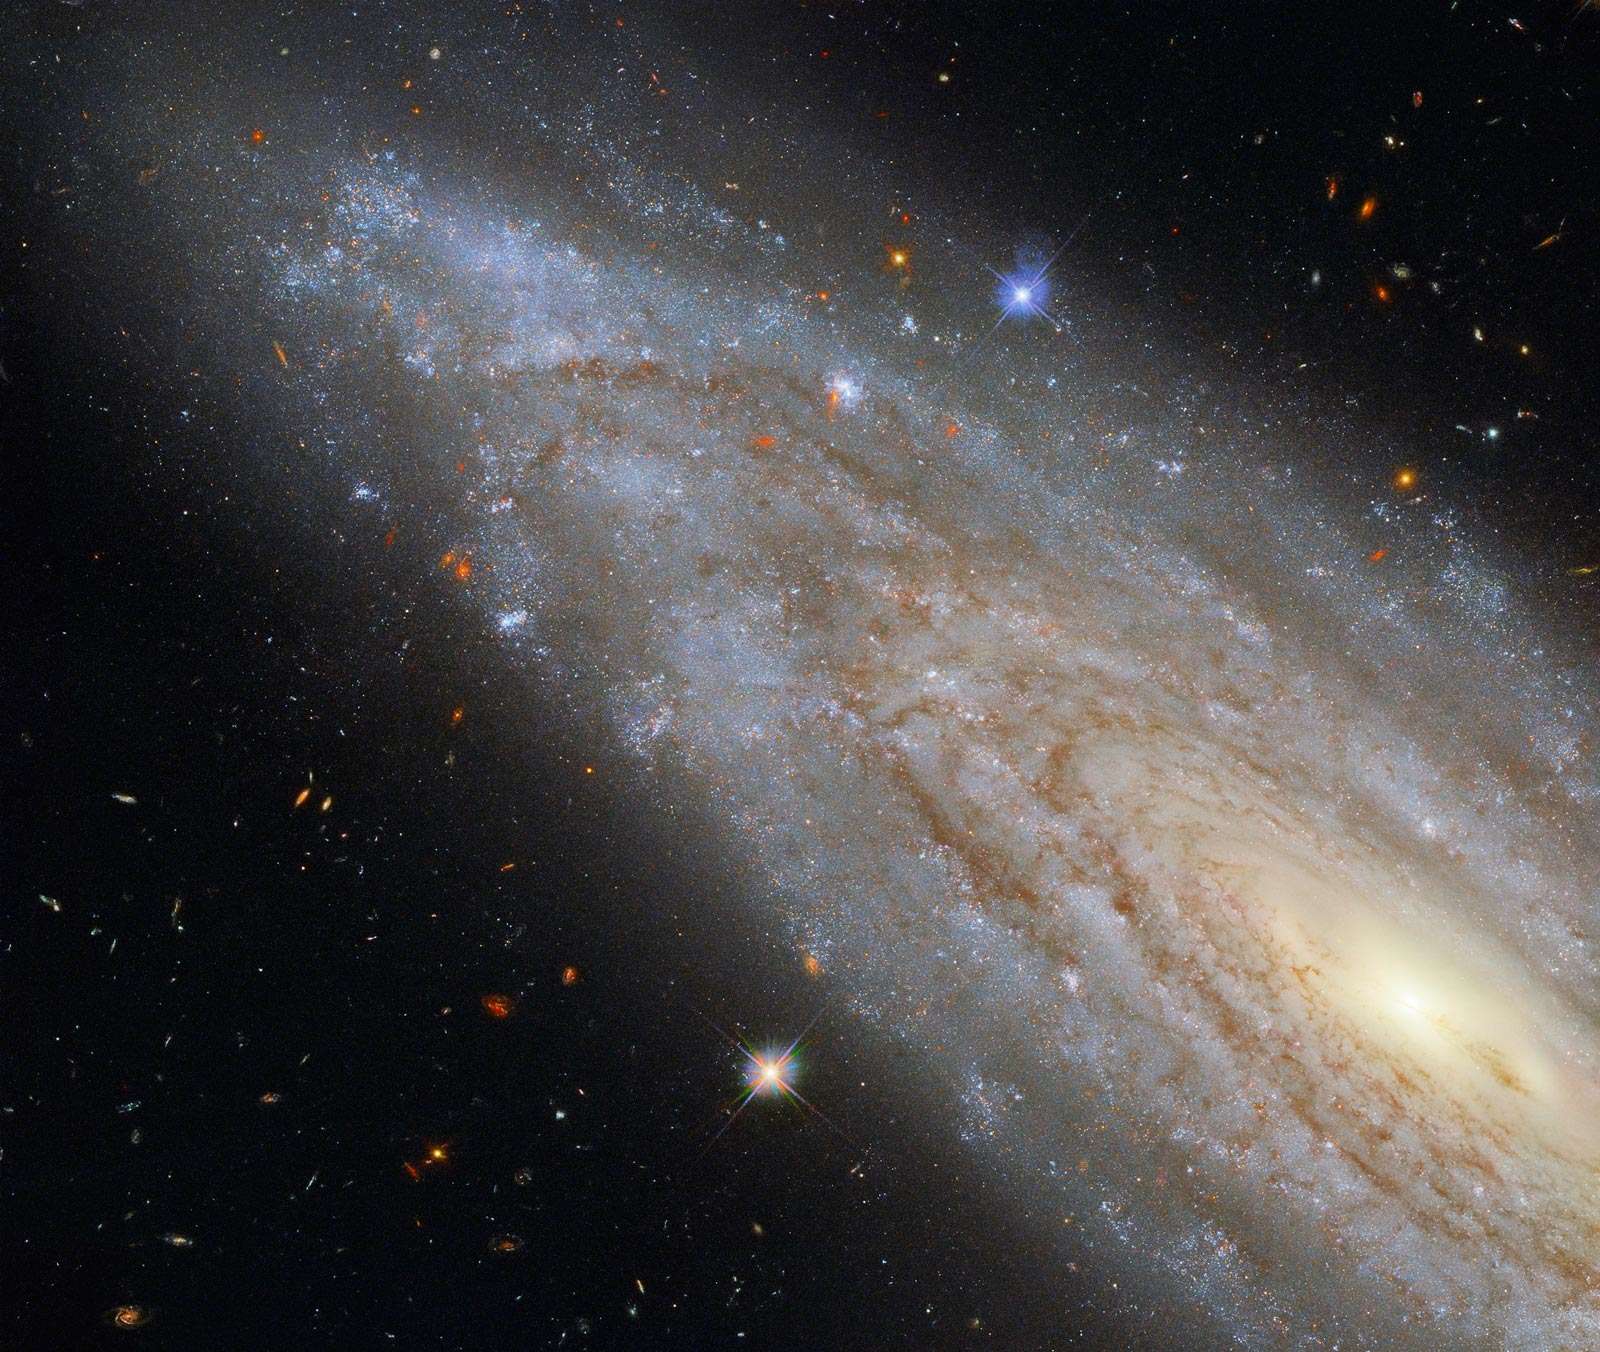 The spiral galaxy NGC 3254, seen by Hubble in 2019. Credits: ESA/Hubble & NASA, A. Riess et al.; CC BY 4.0